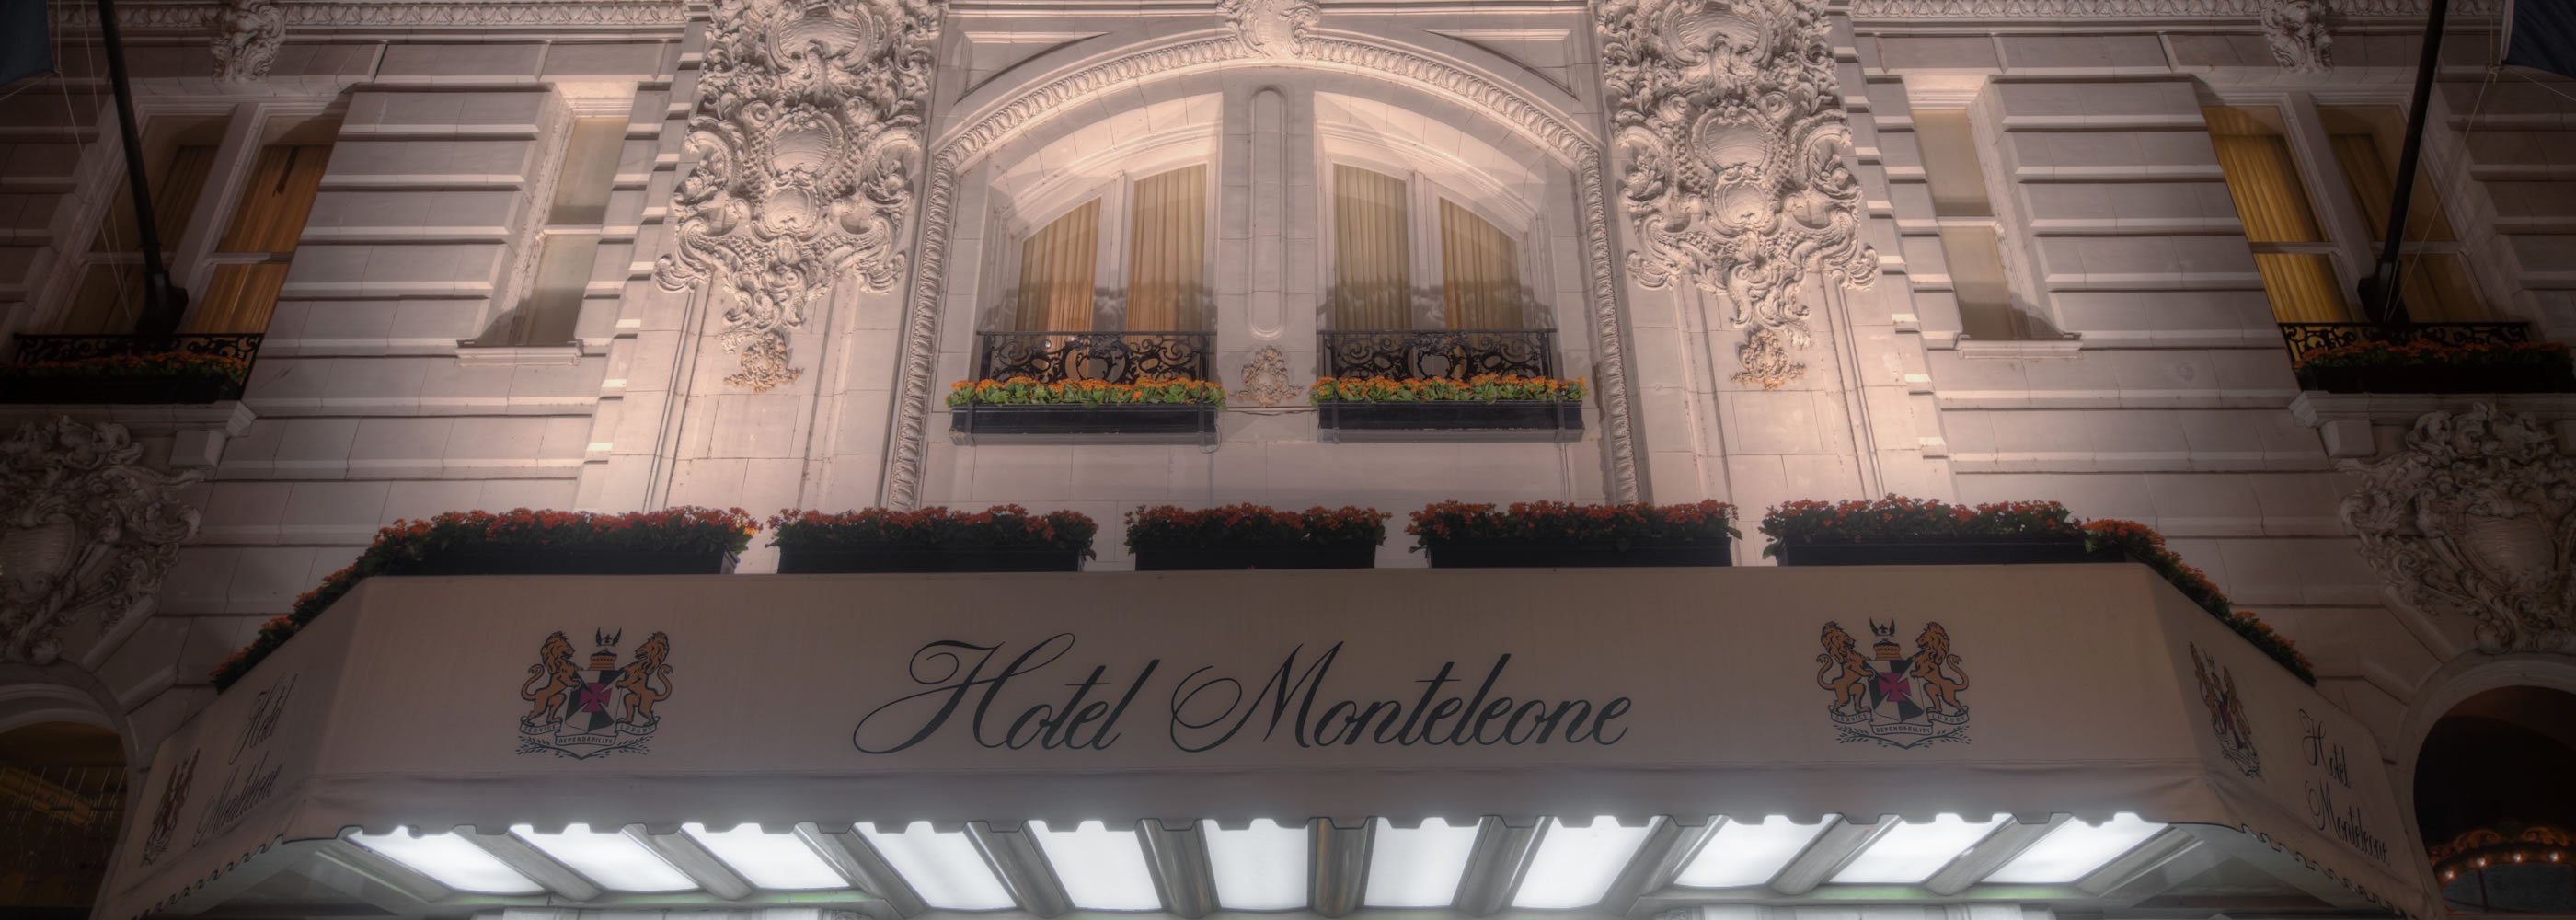 Hotel Monteleone, one of the most haunted Hotels in New Orleans' French Quarter